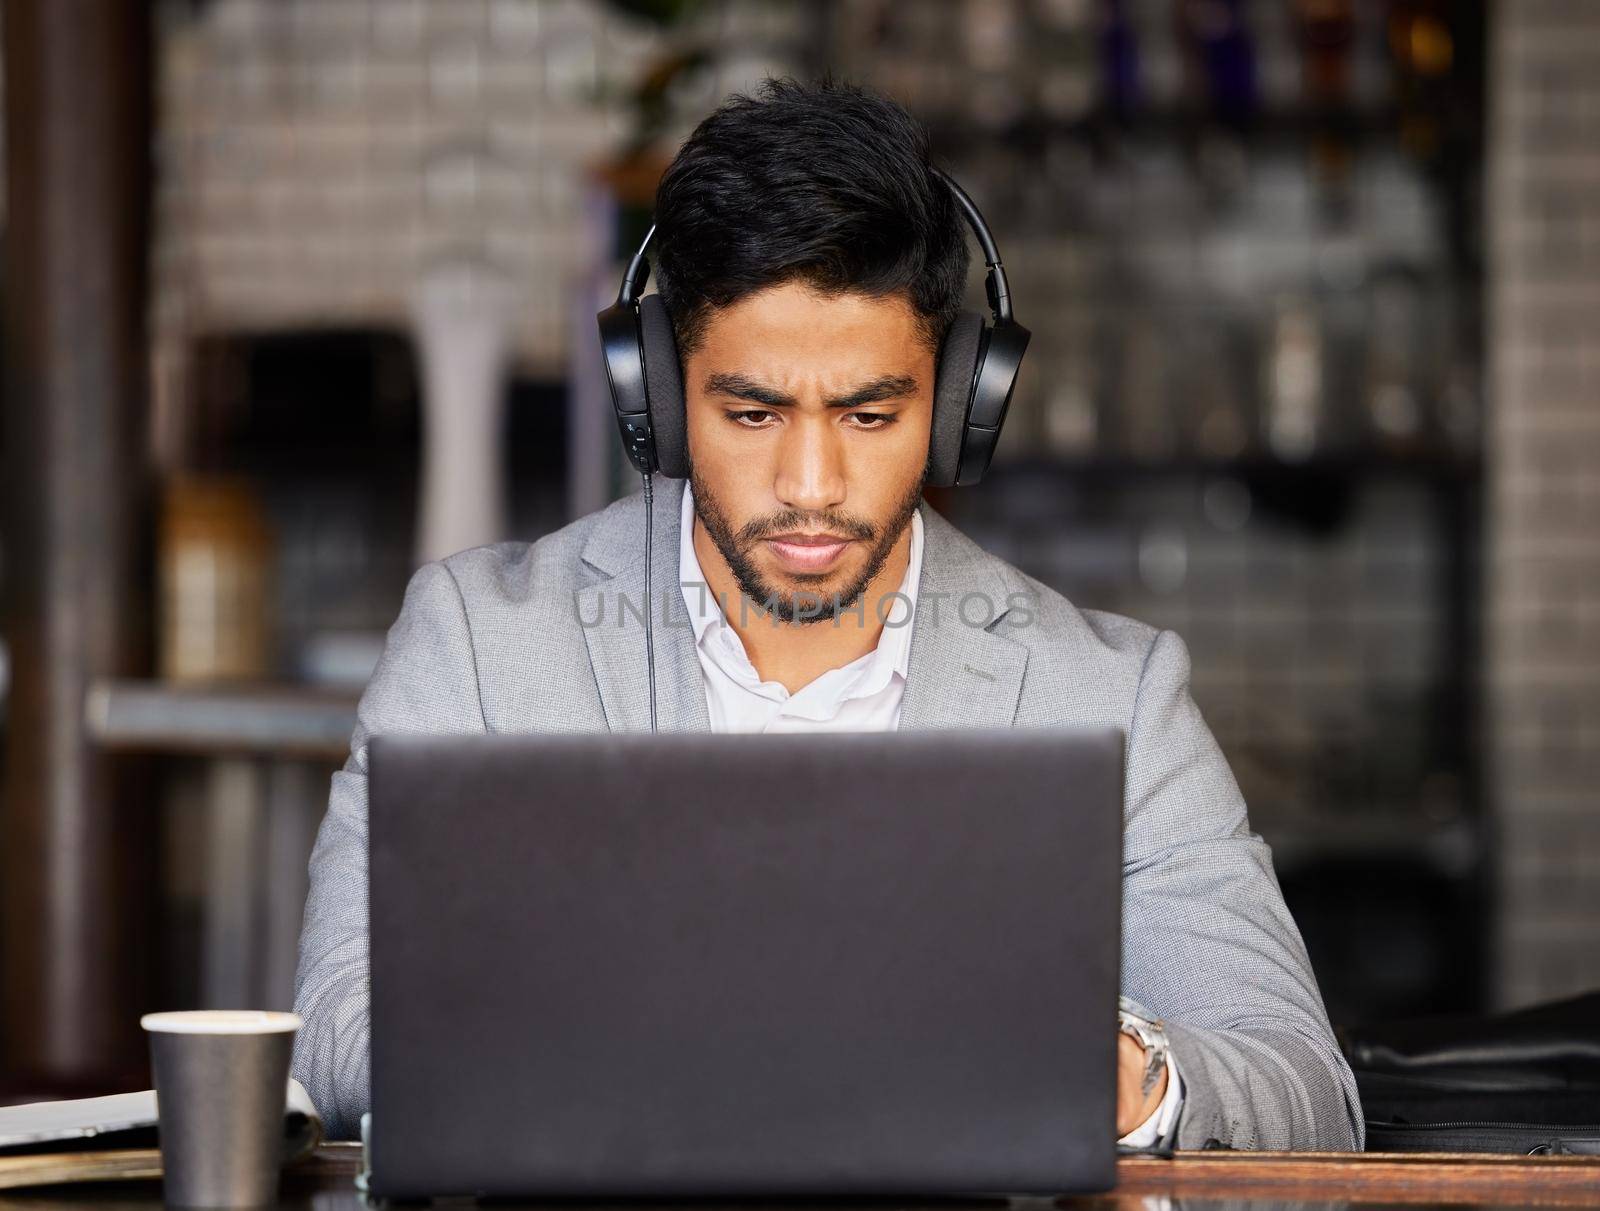 Music gets me in serious business mode. Shot of a young businessman wearing headphones while using a laptop at a cafe. by YuriArcurs